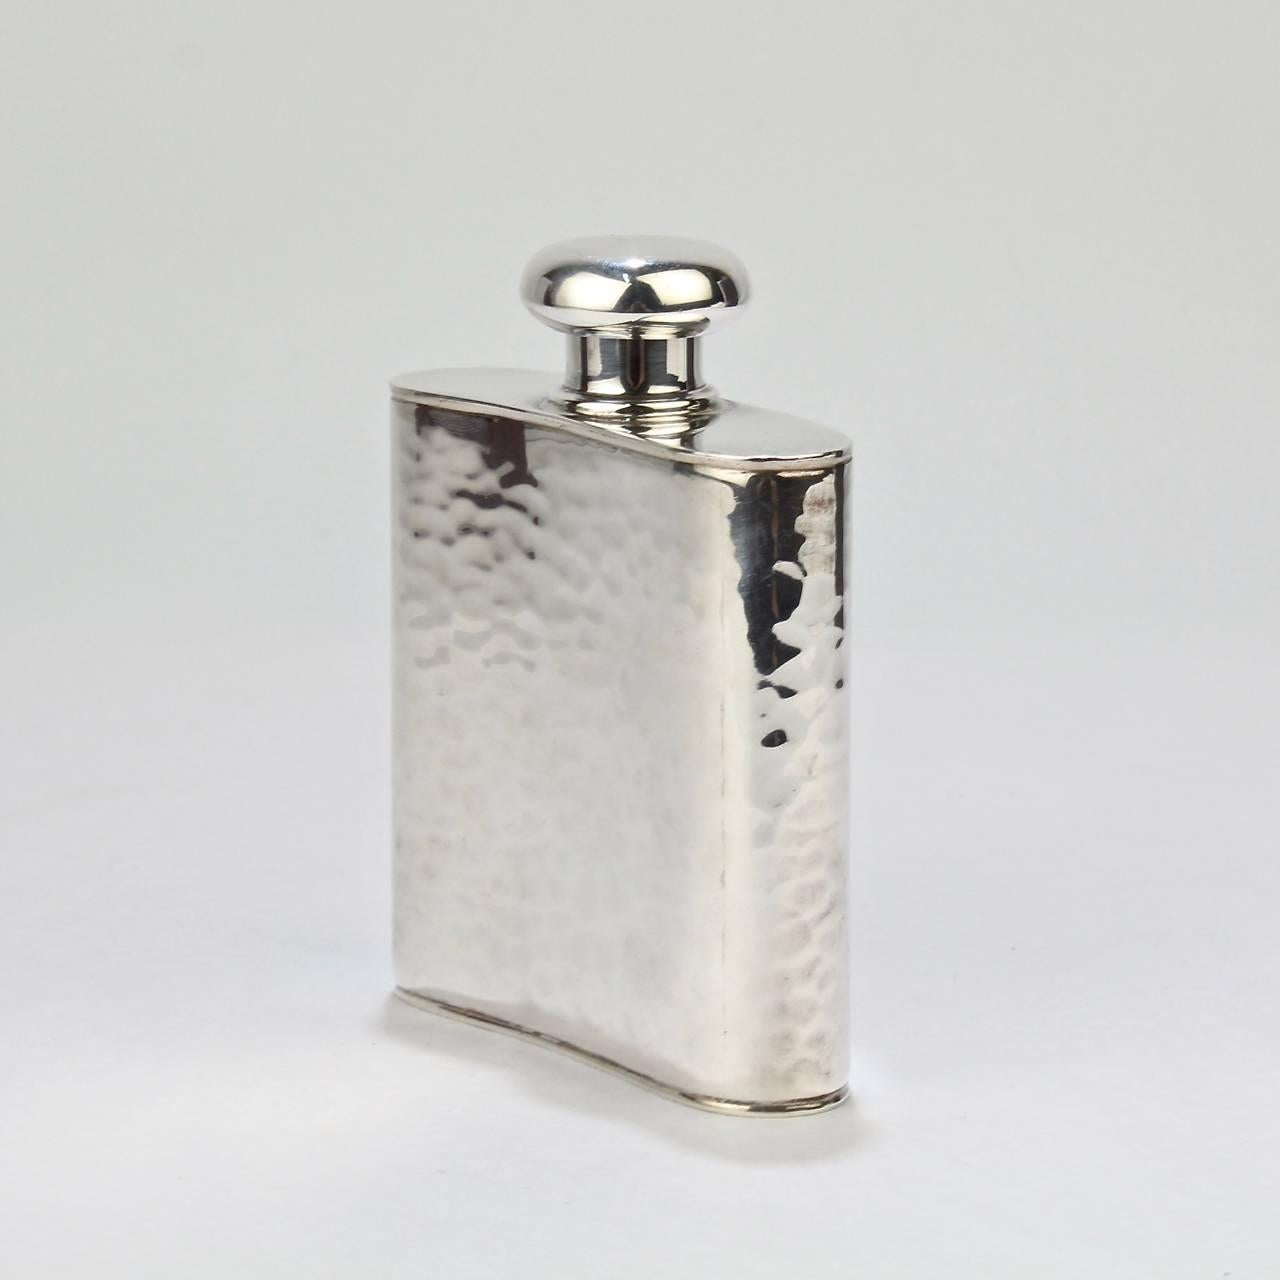 American Hand-Hammered Sterling Silver Liquor or Whisky Hip Flask by Schroth